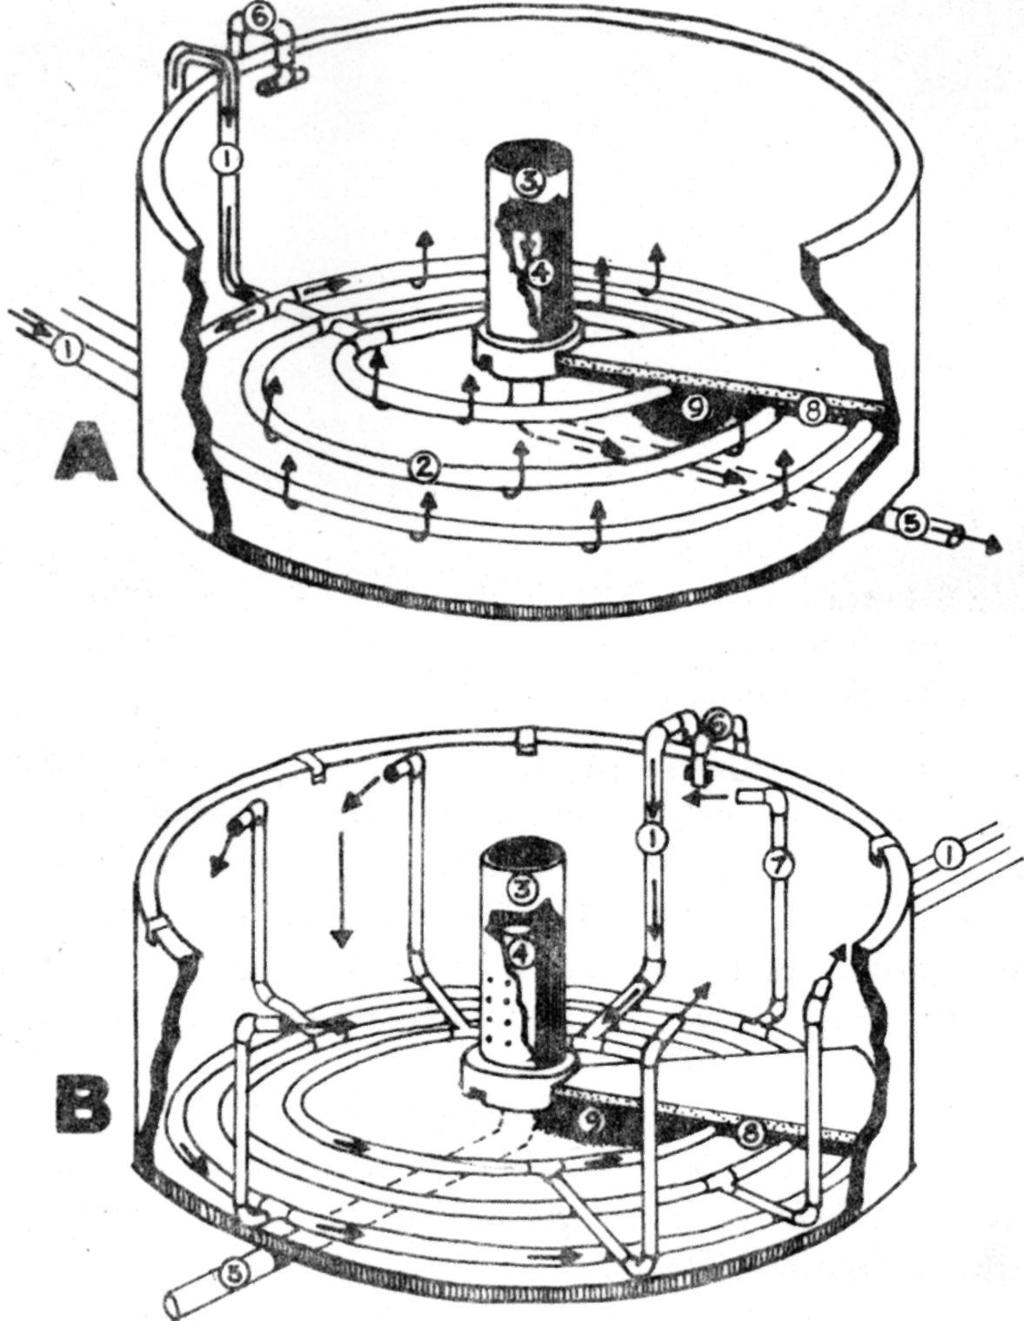 22 J.H. Primavera per tank. Wrap the lamp with black polyethylene netting material to reduce light intensity. Adjust photoperiod to 12-14 hours of light by means of an electronic timer. Fig. 11.